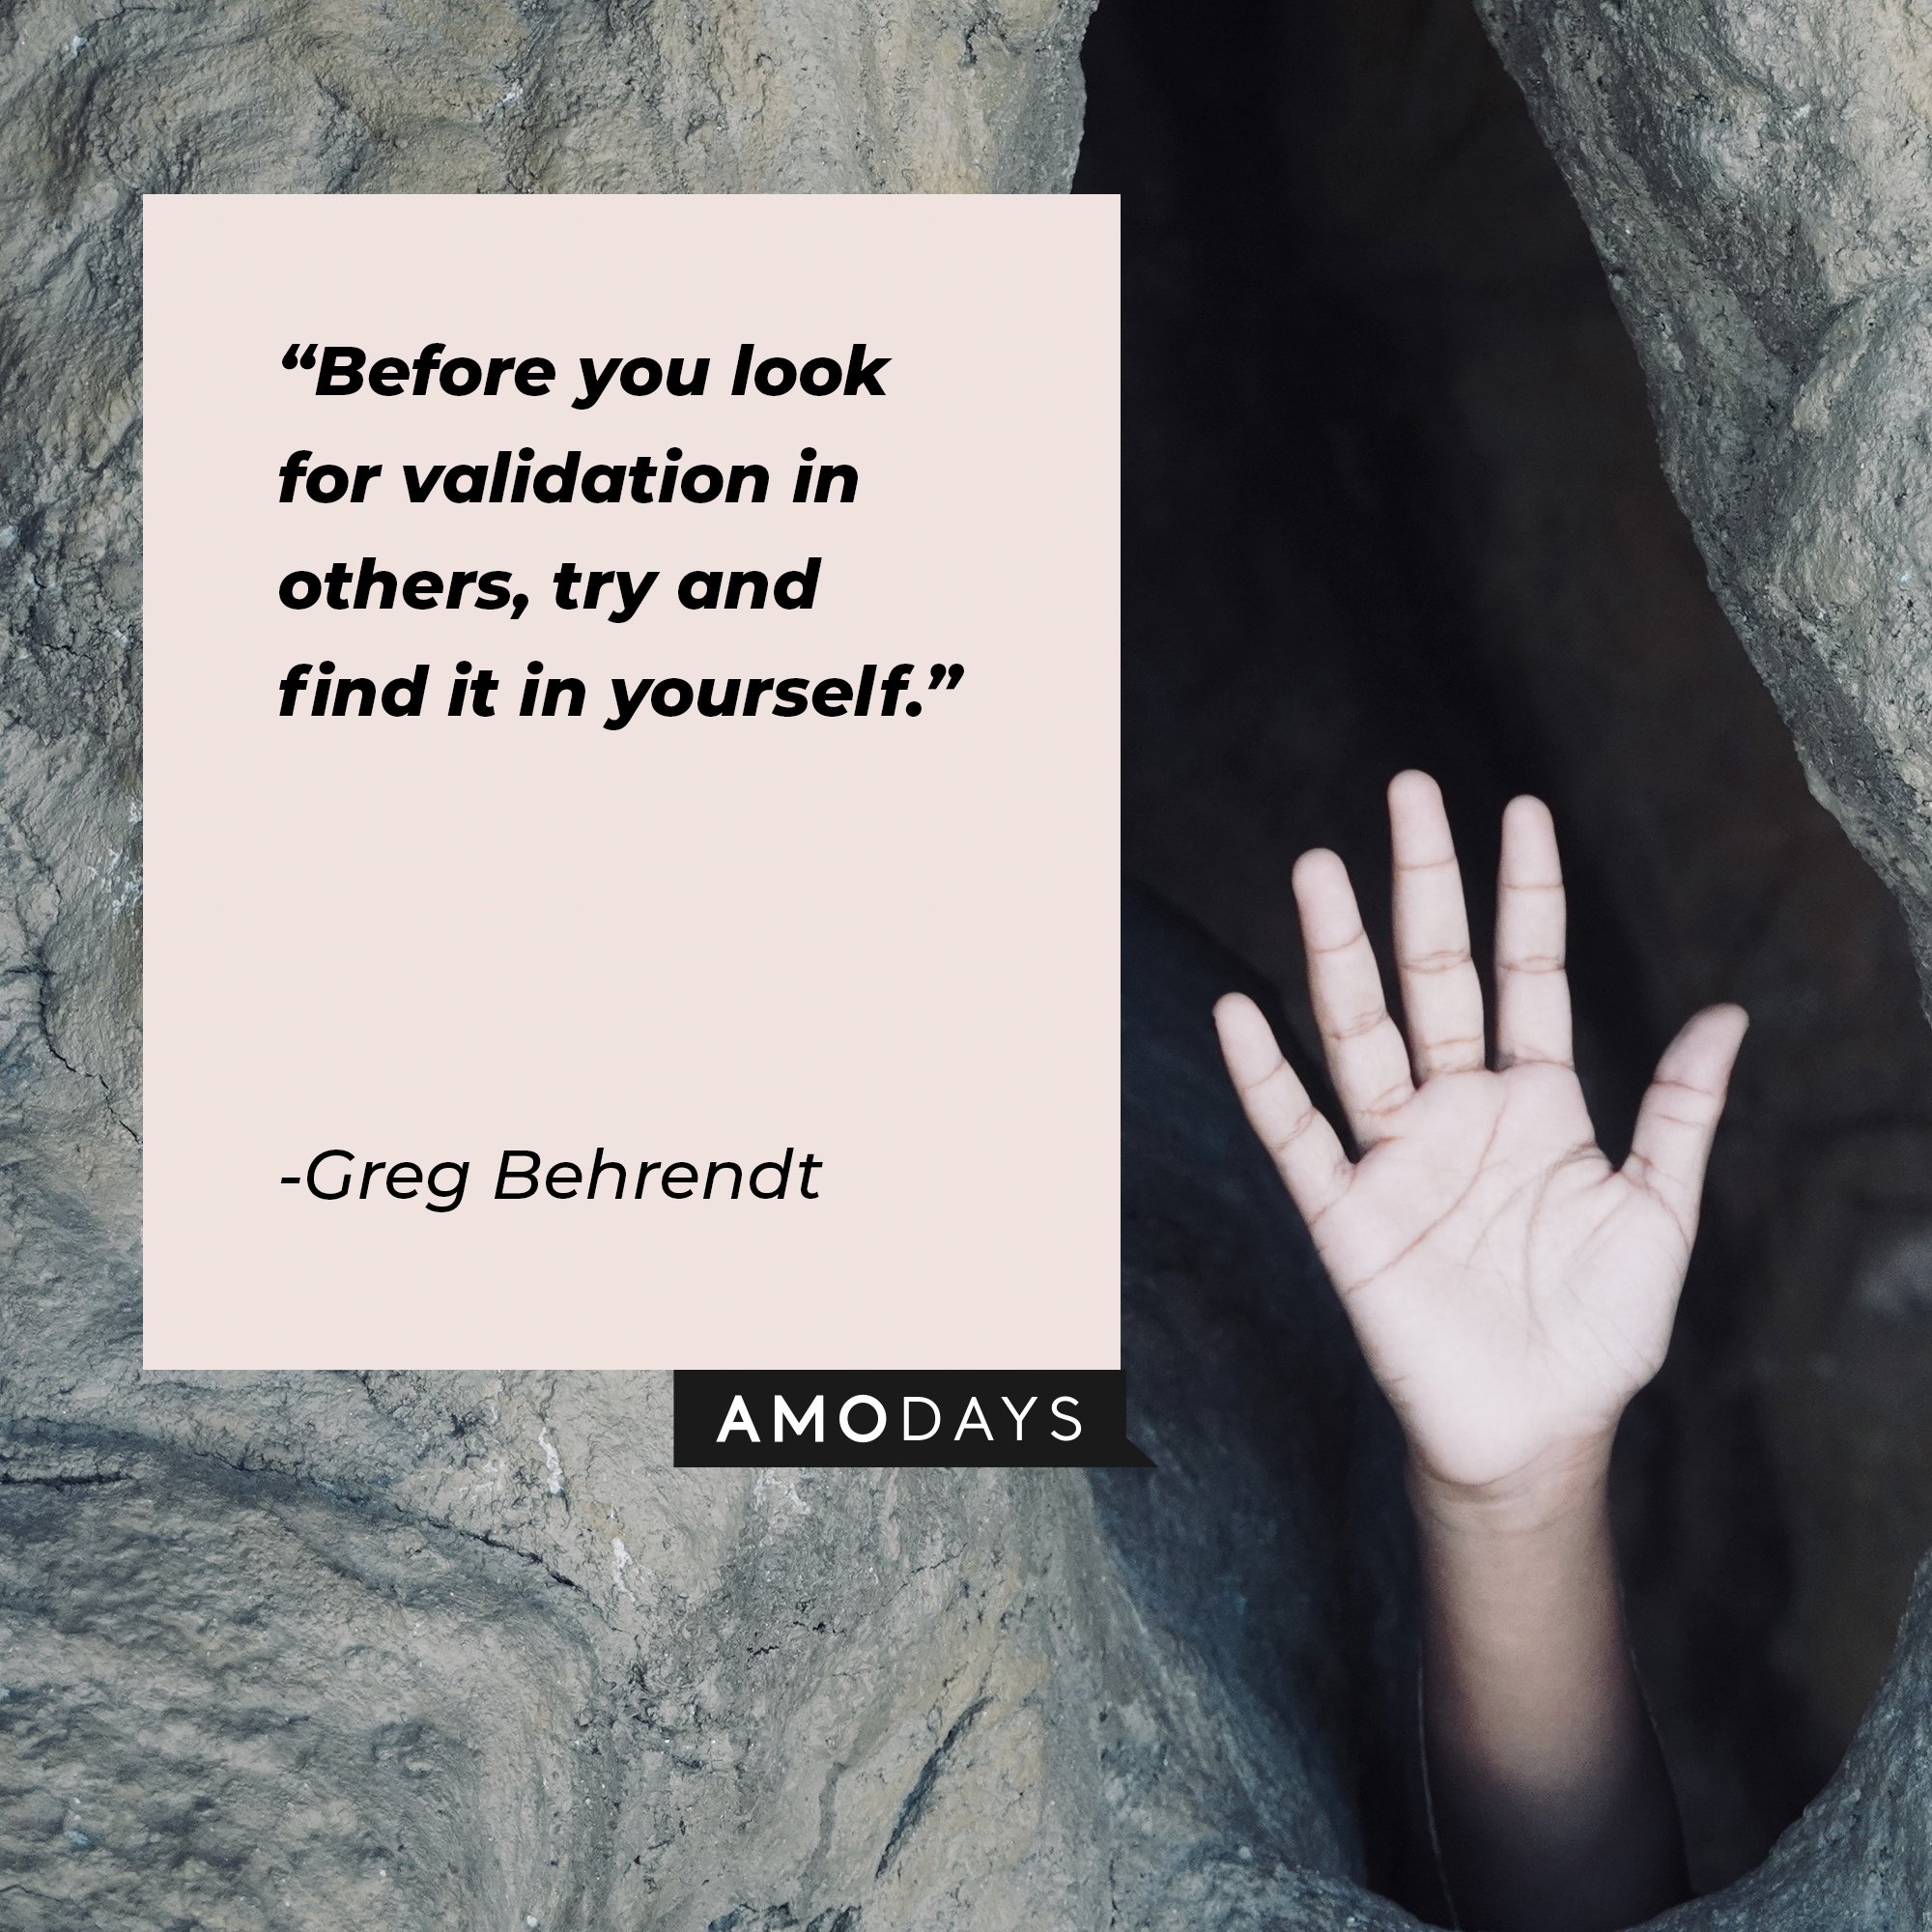 Greg Behrendt’s quote: “Before you look for validation in others, try and find it in yourself.” | Image: AmoDays 